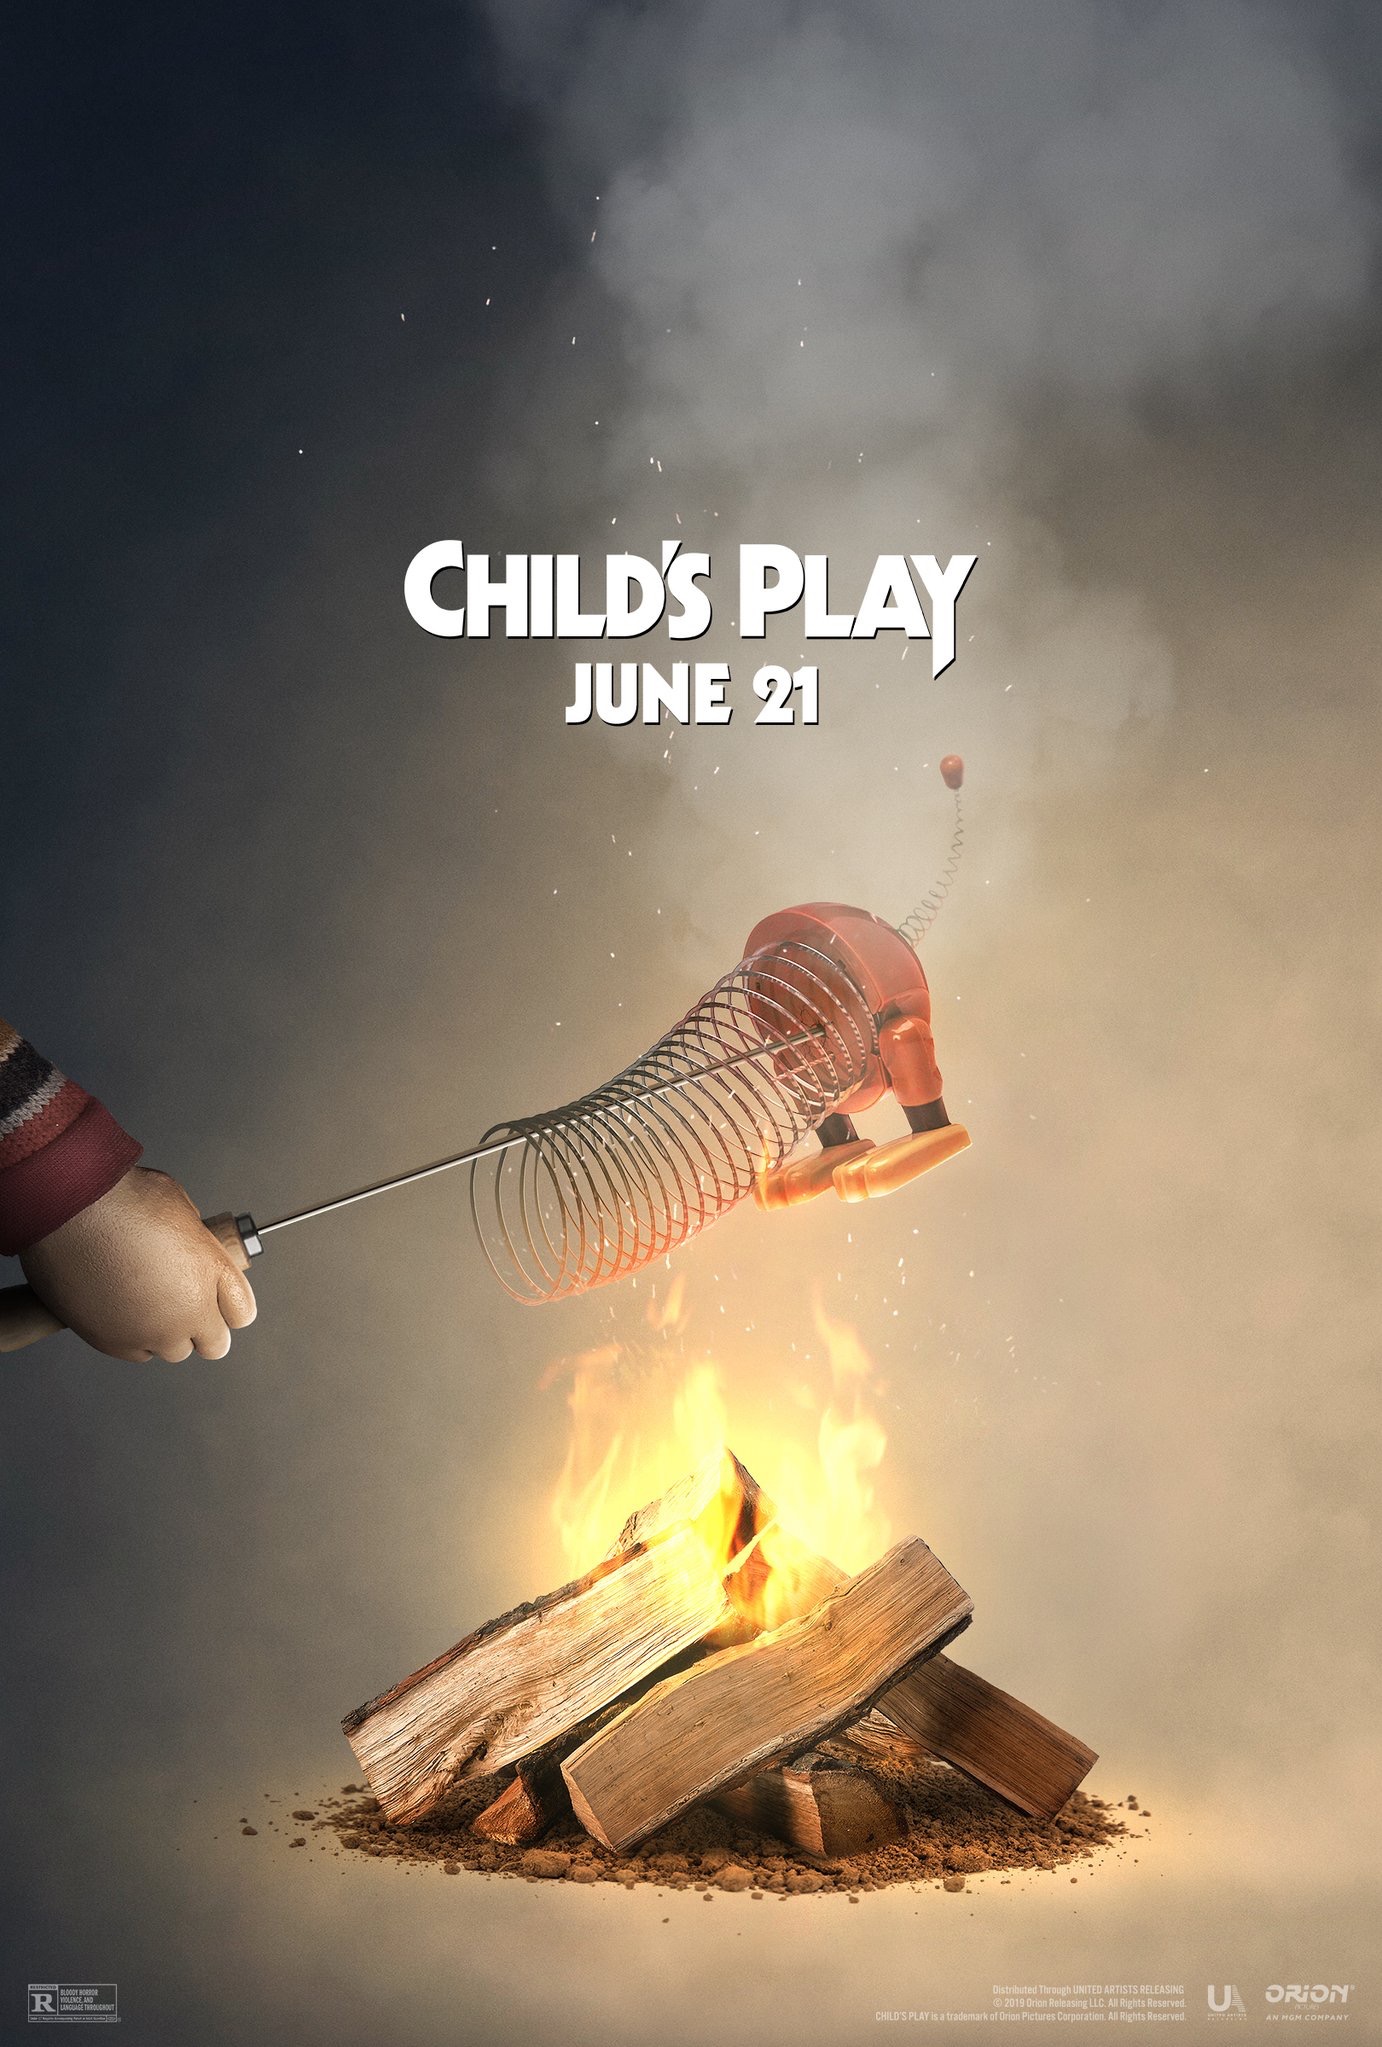 chucky-roasts-slinky-from-toy-story-over-a-fire-in-a-new-childs-play-poster2